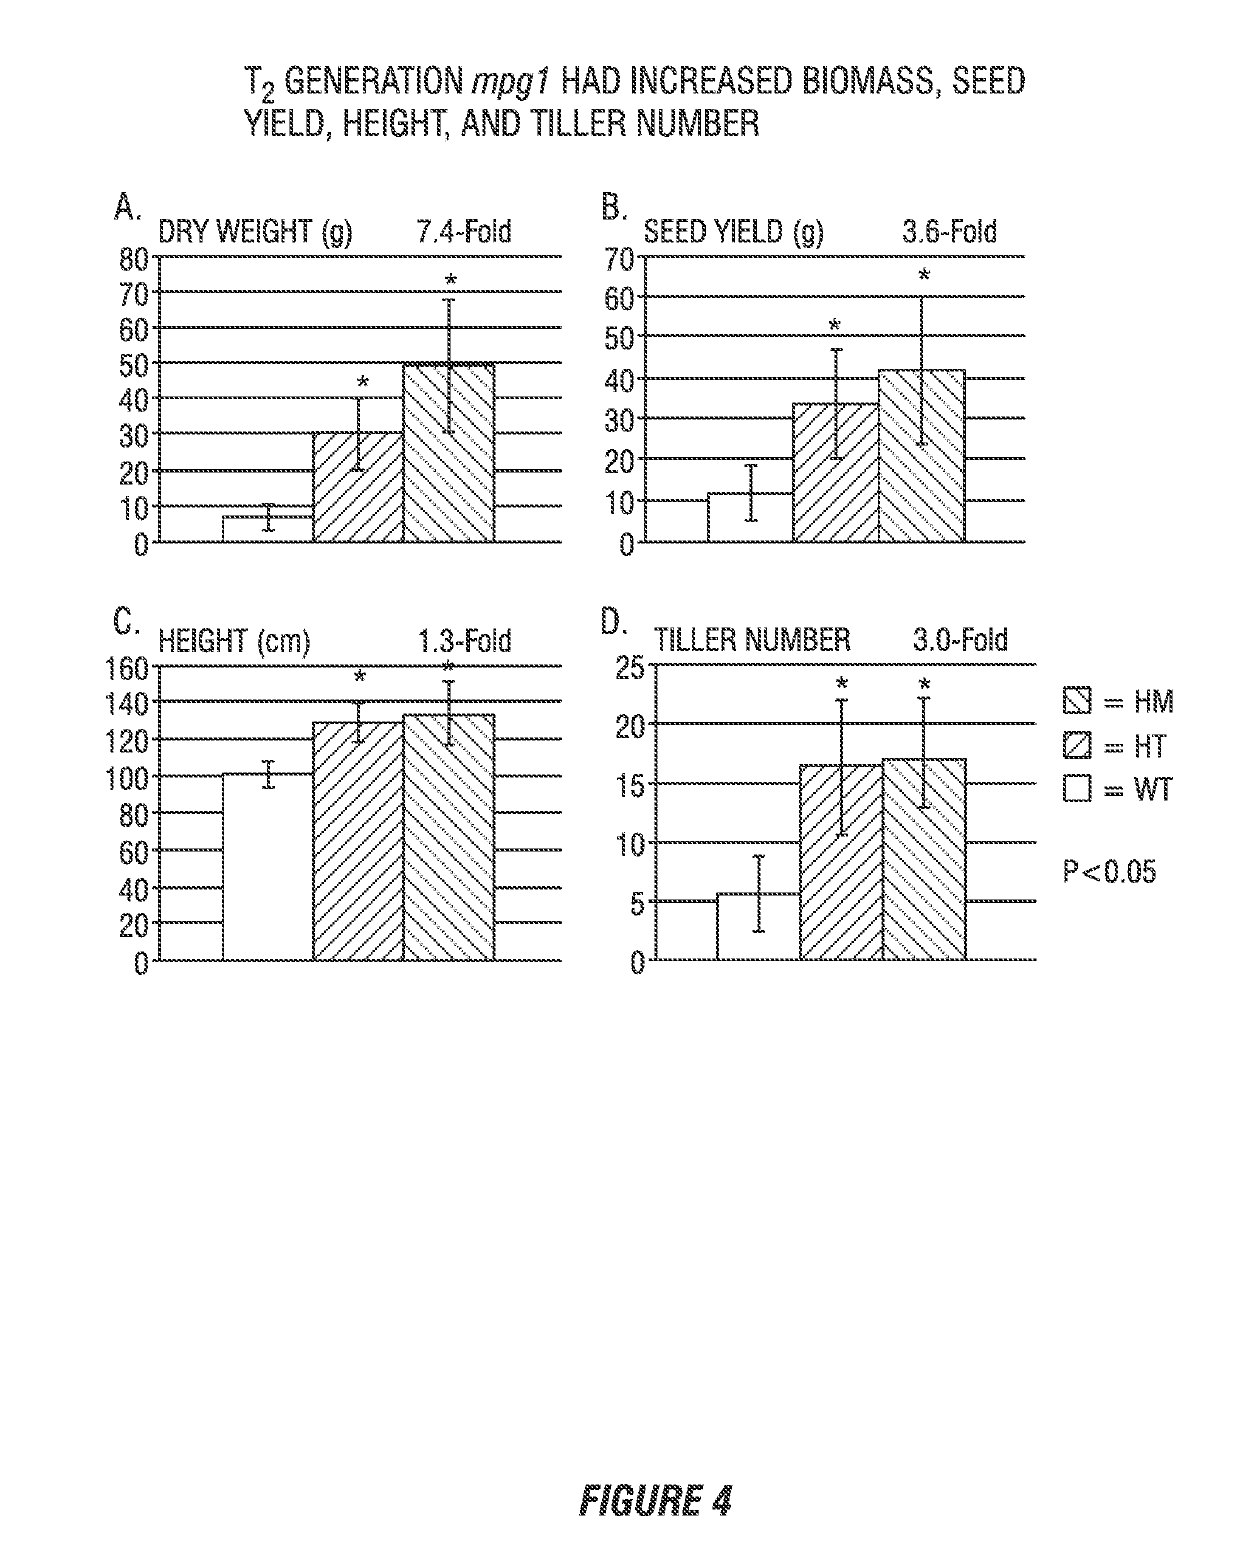 Modulation of rice mpg1 activity to increase biomass accumulation, grain yield, and stress tolerance in plants